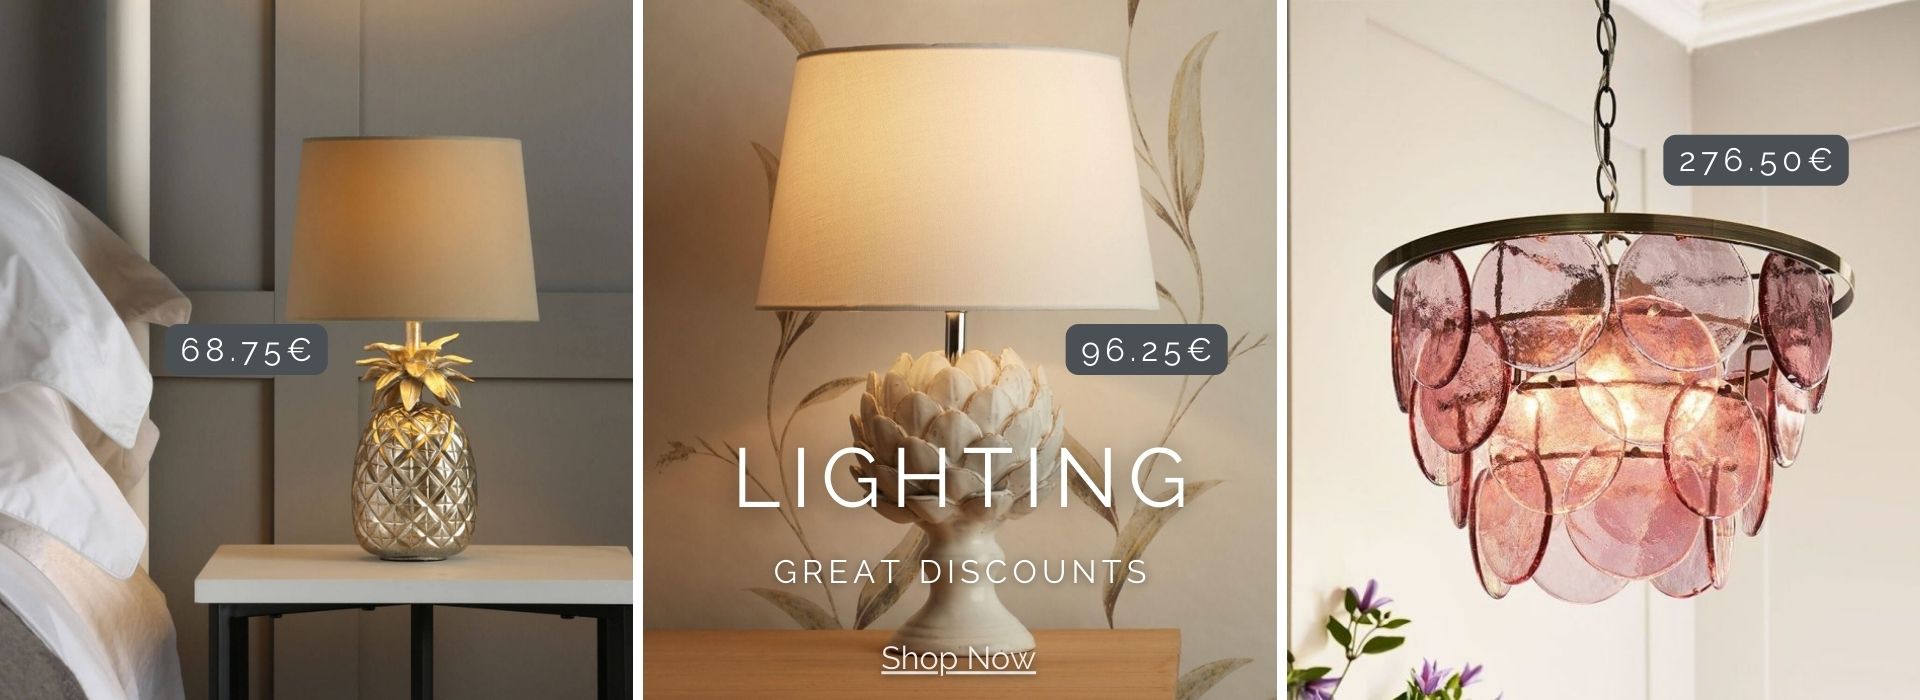 Lighting Special Prices, Great Discounts in Lamps